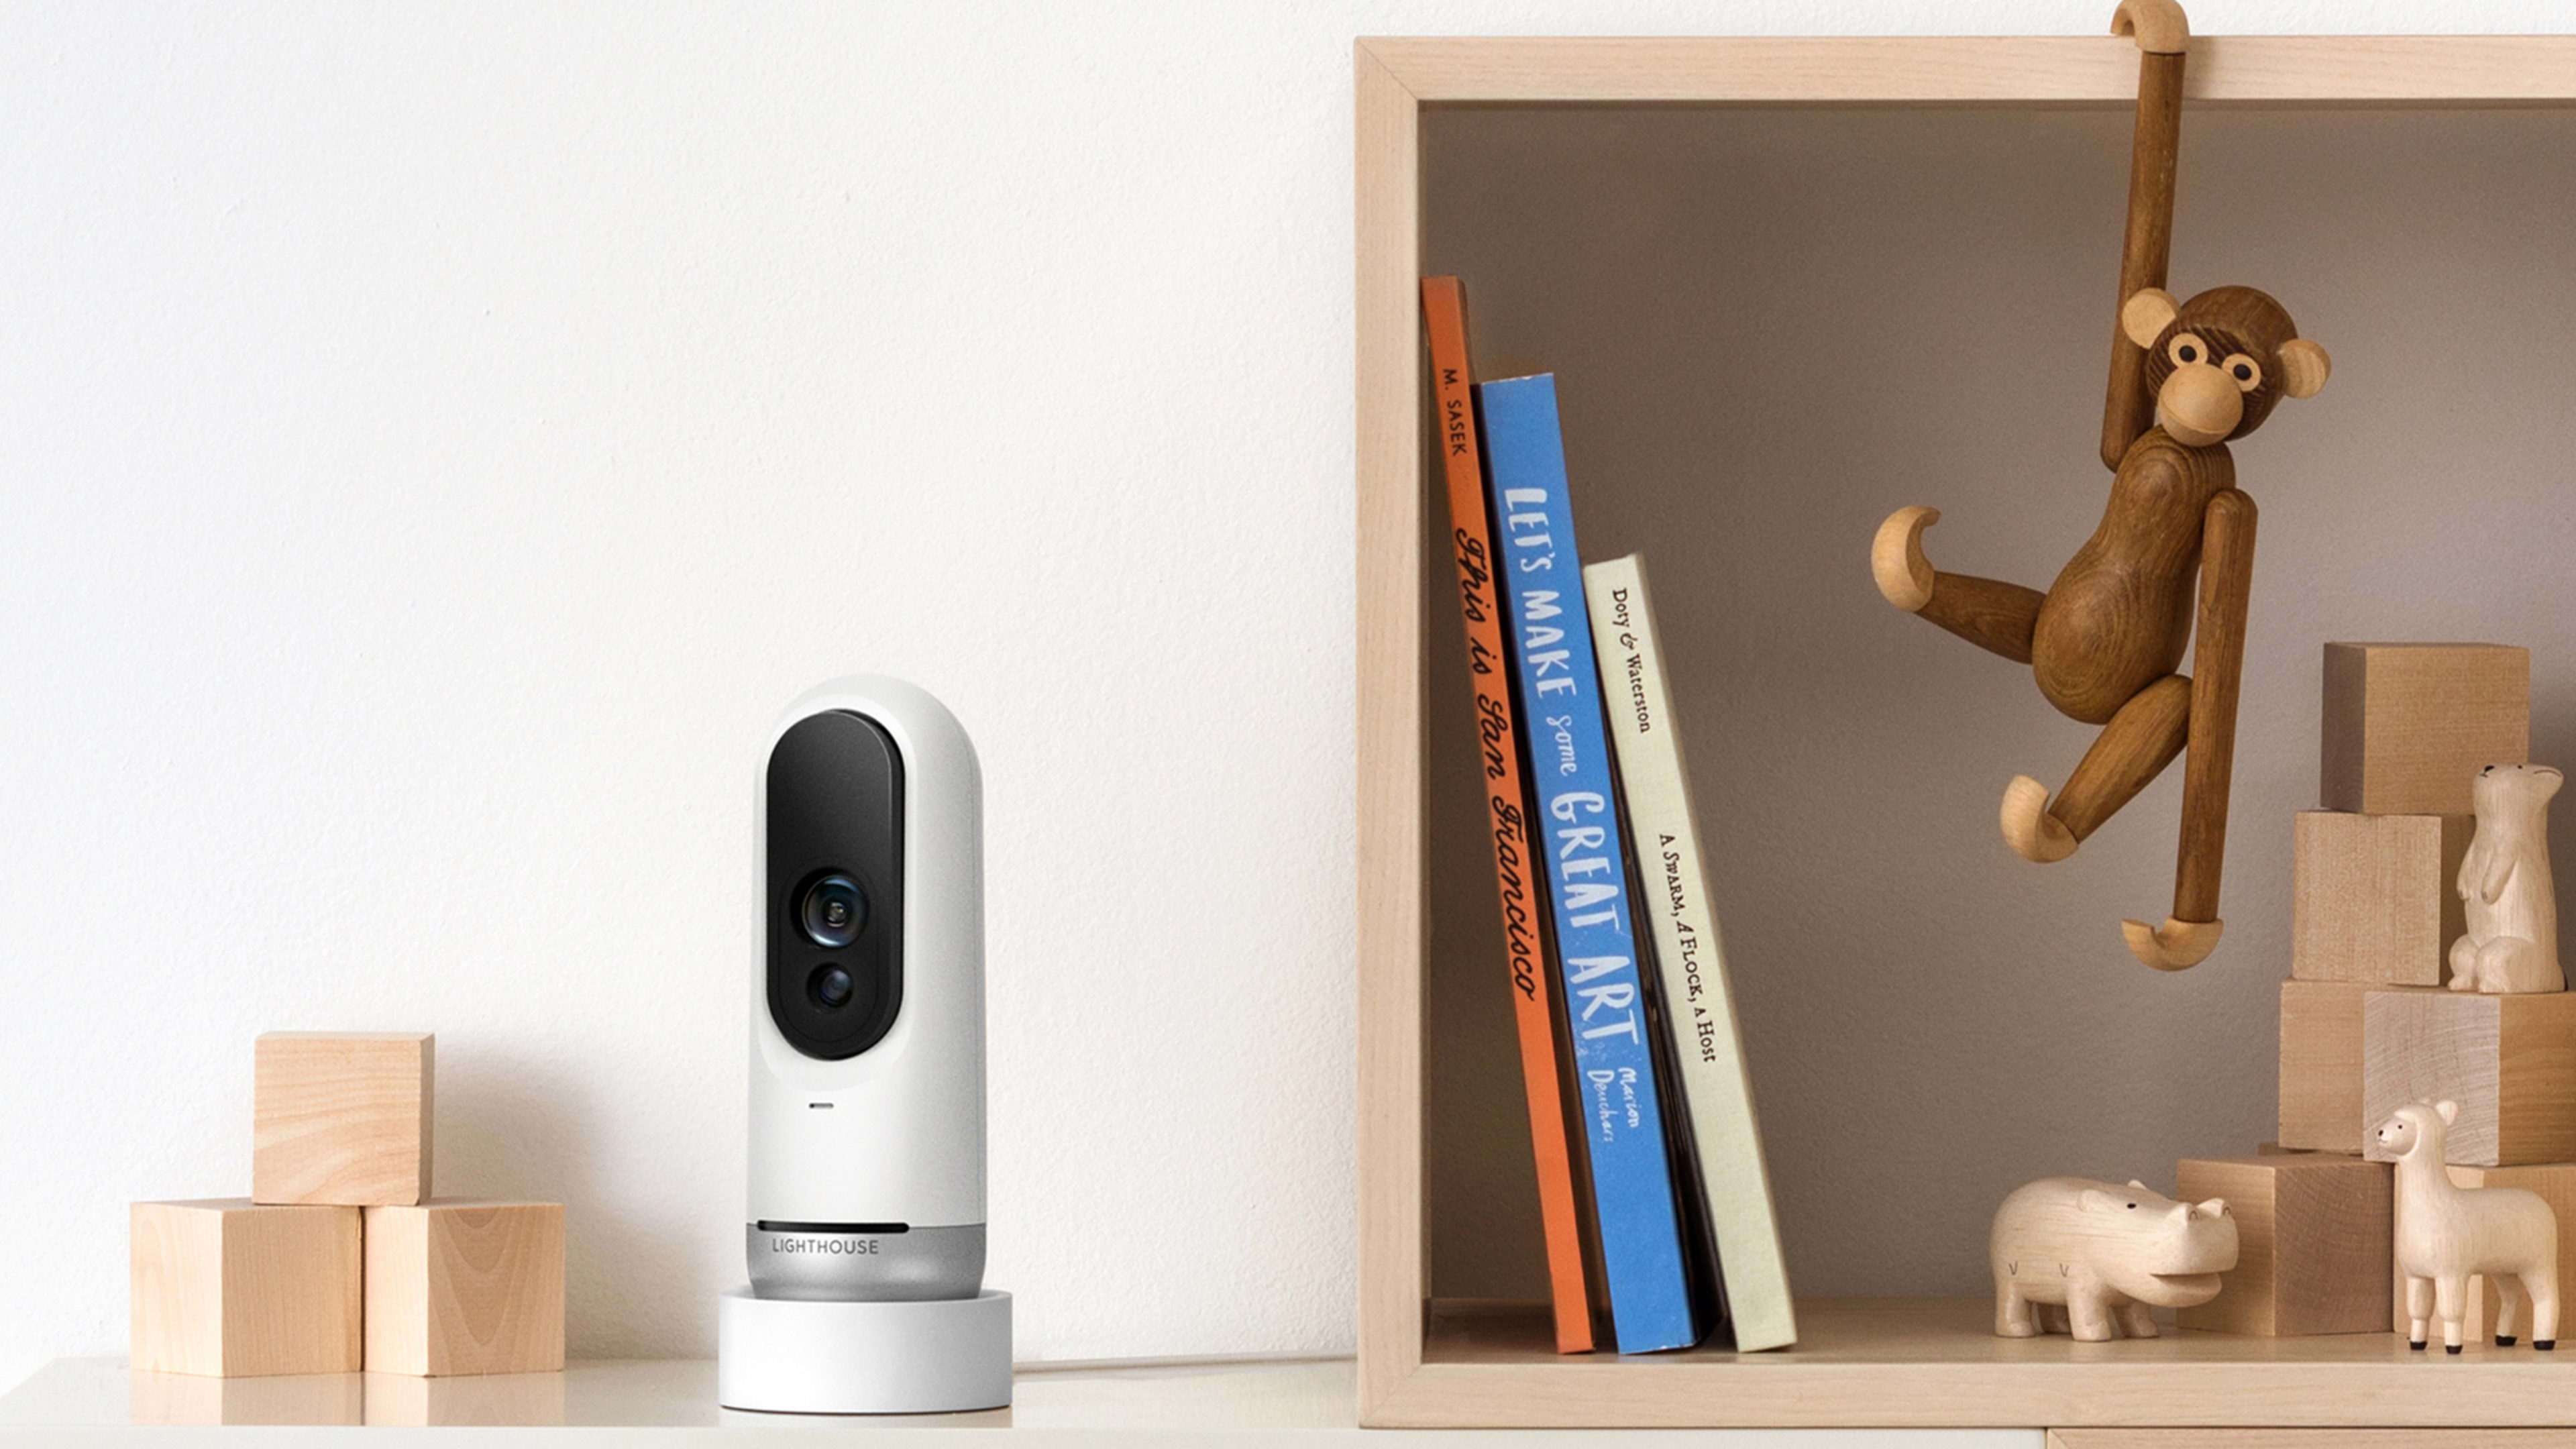 Lighthouse Is The Perfect Security Camera For Surveilling Your Own Family